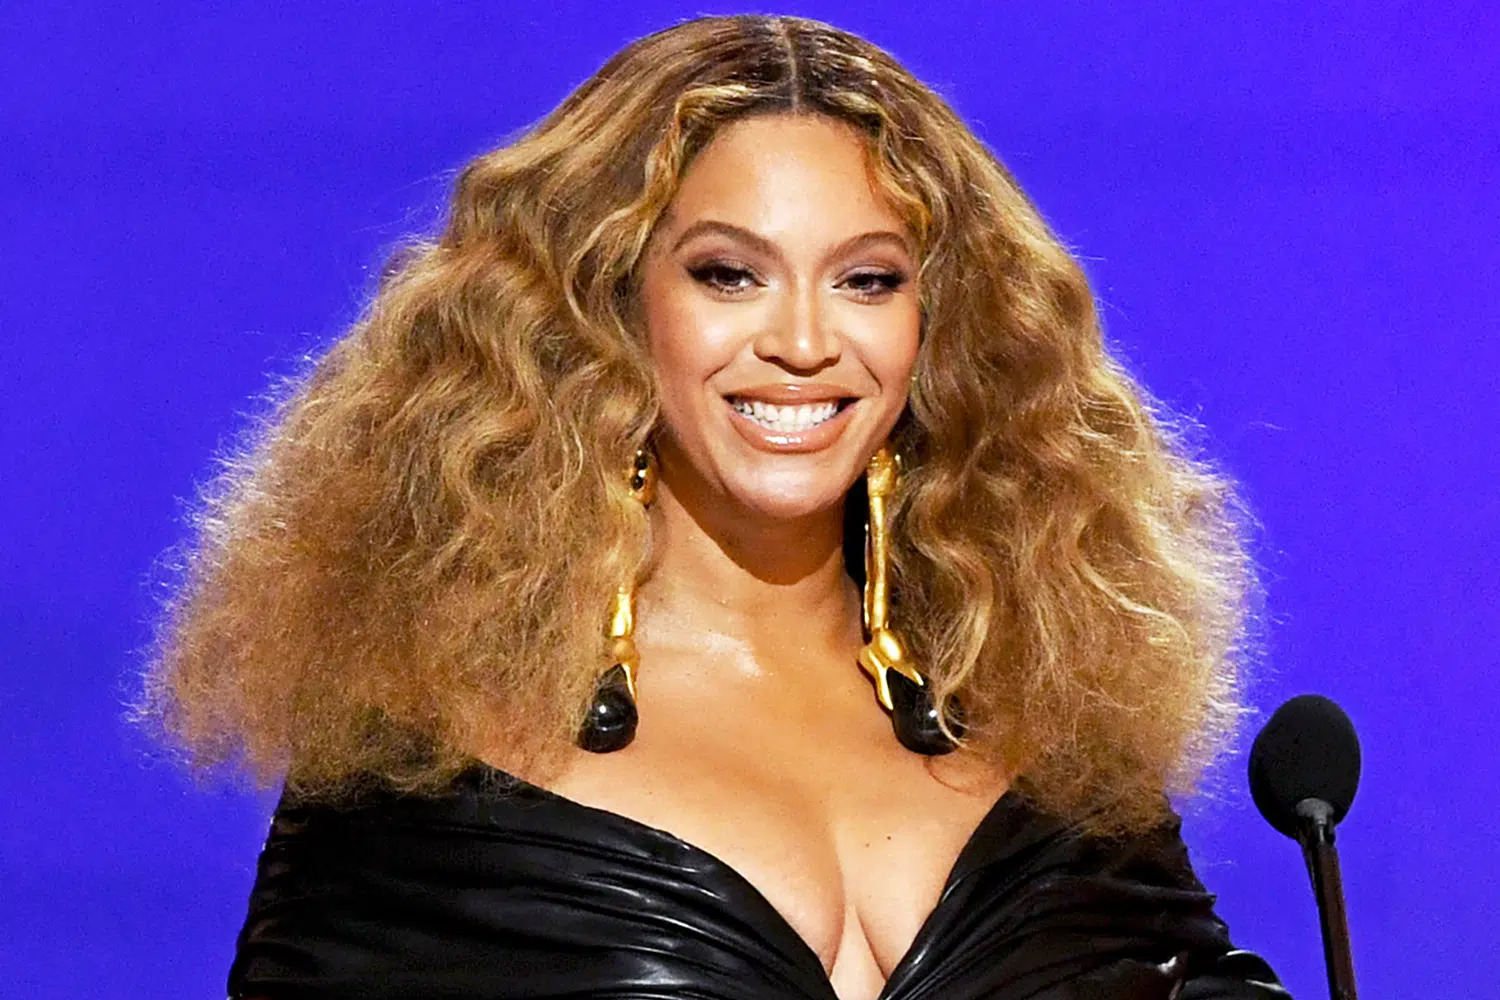 Beyoncé Announces Her First New Album in 6 Years